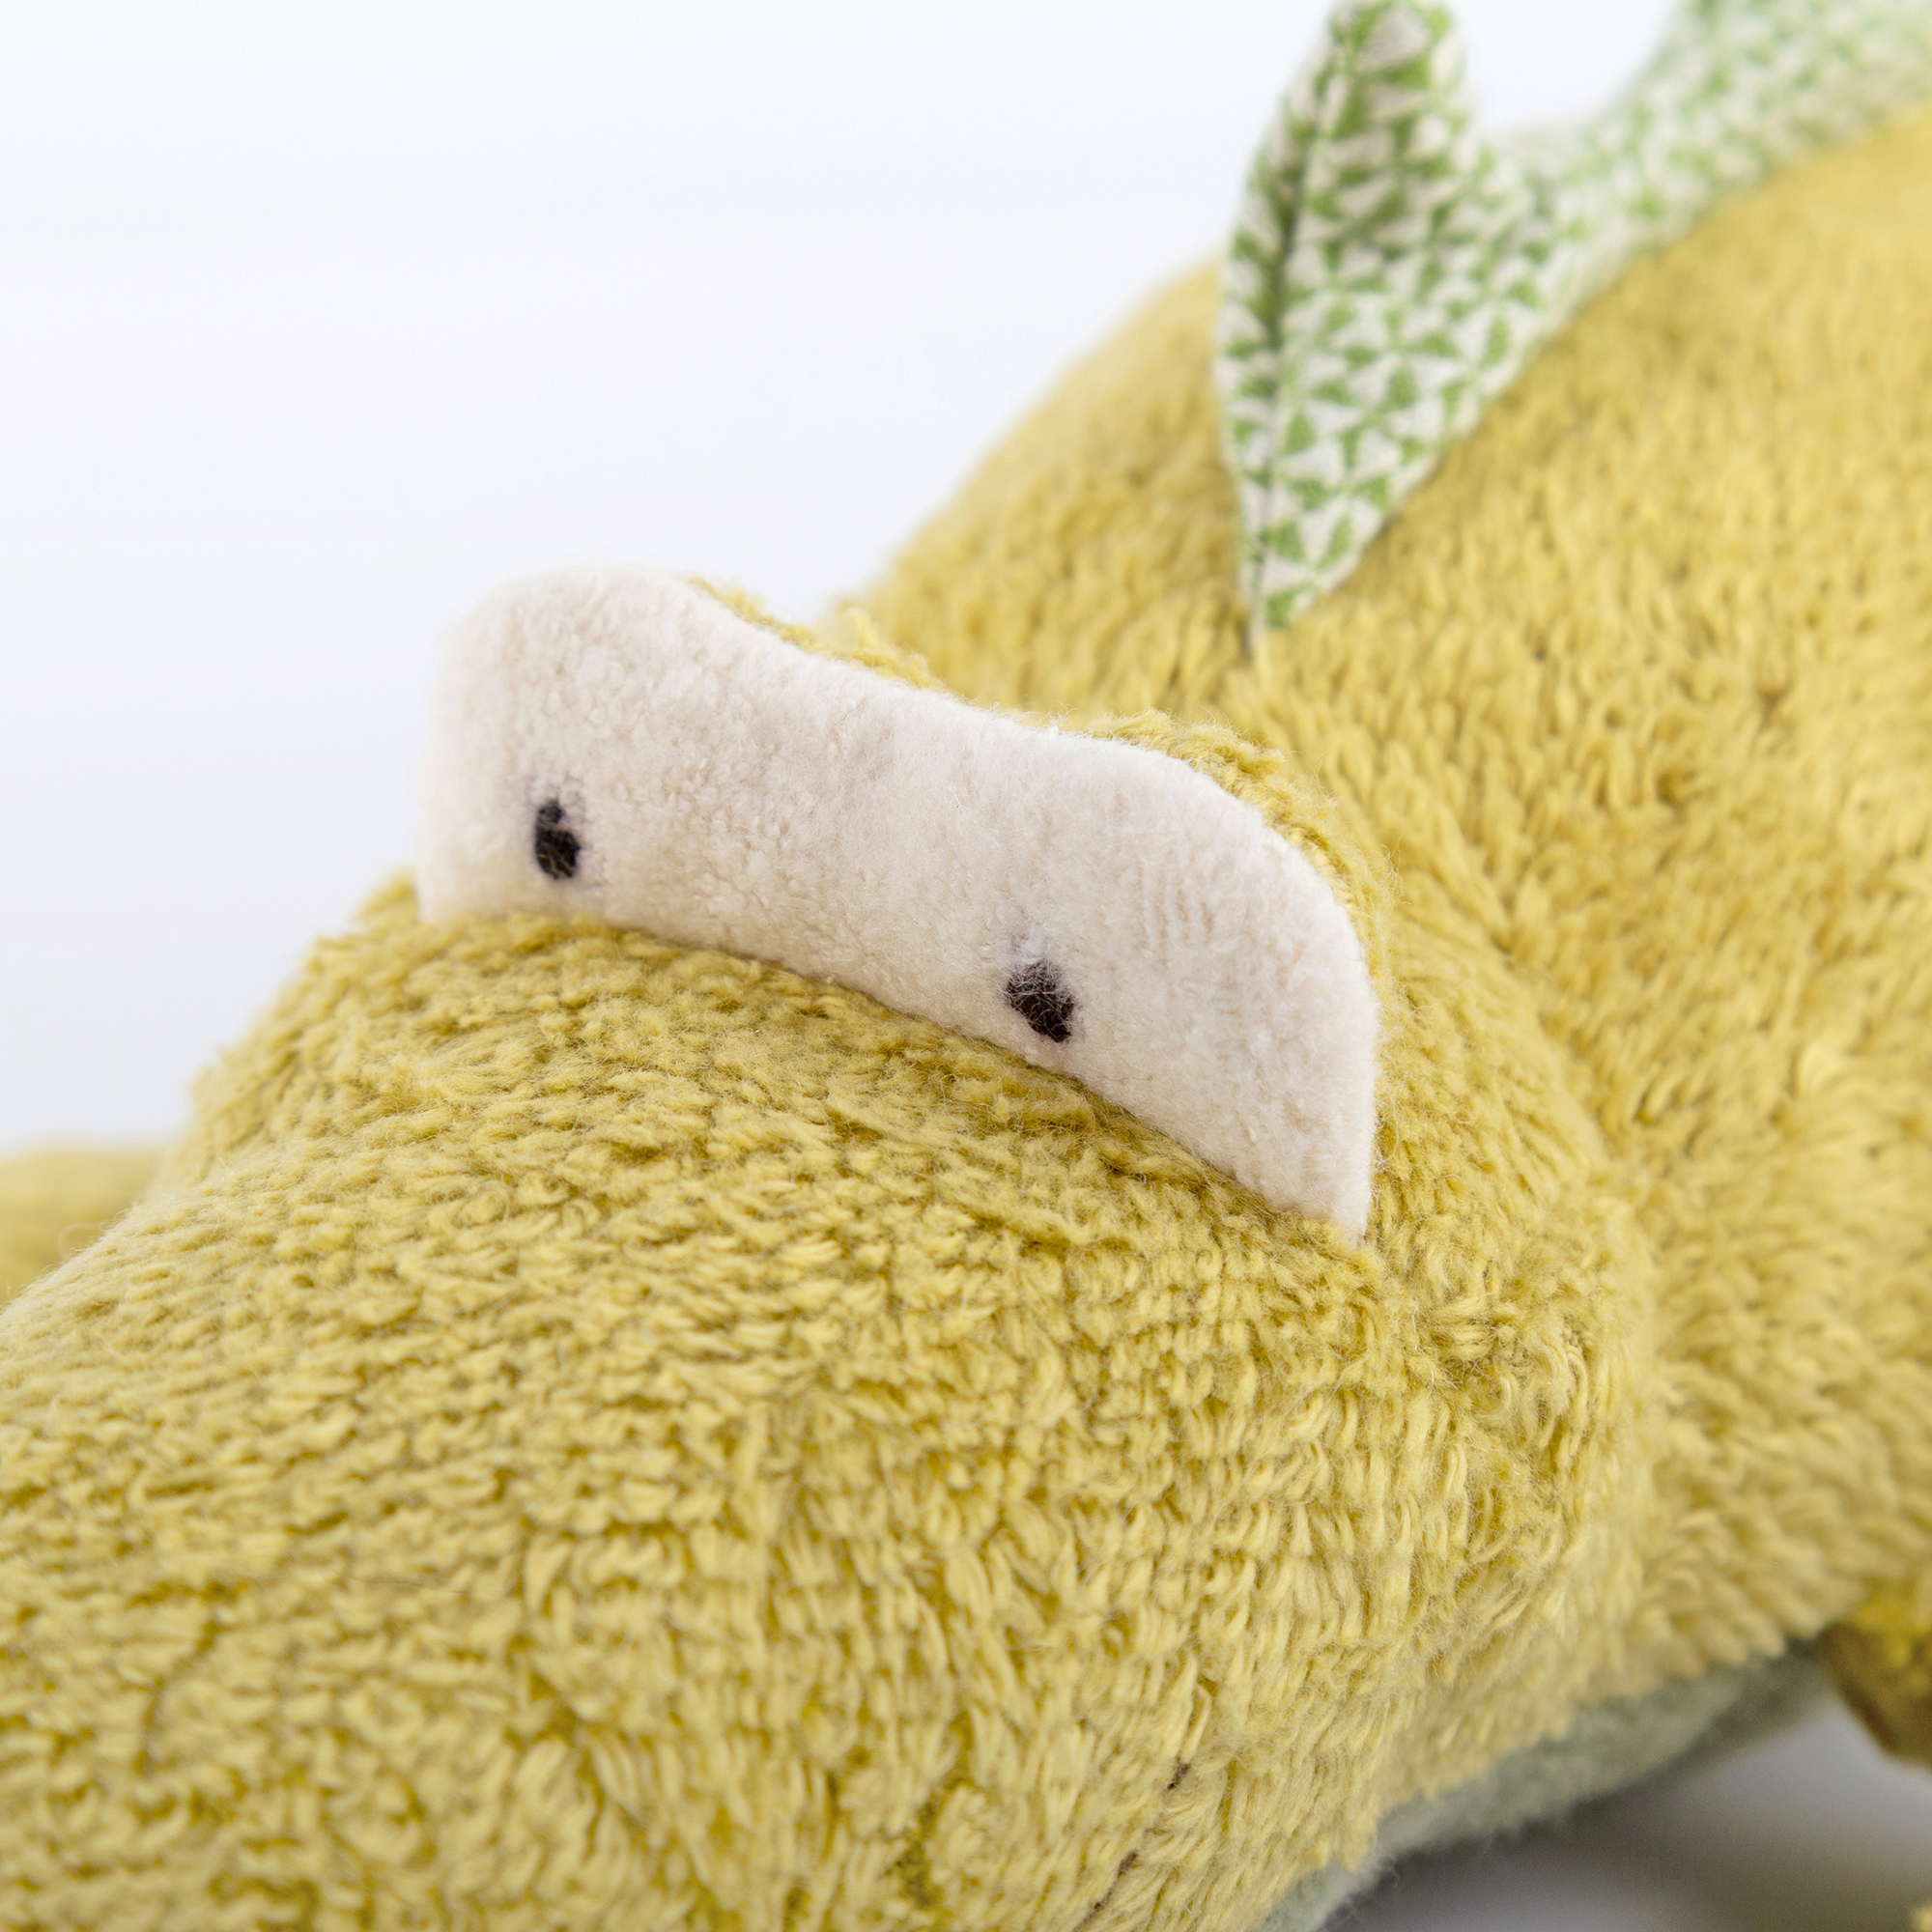 Organic soft toy crocodile, Green Collection